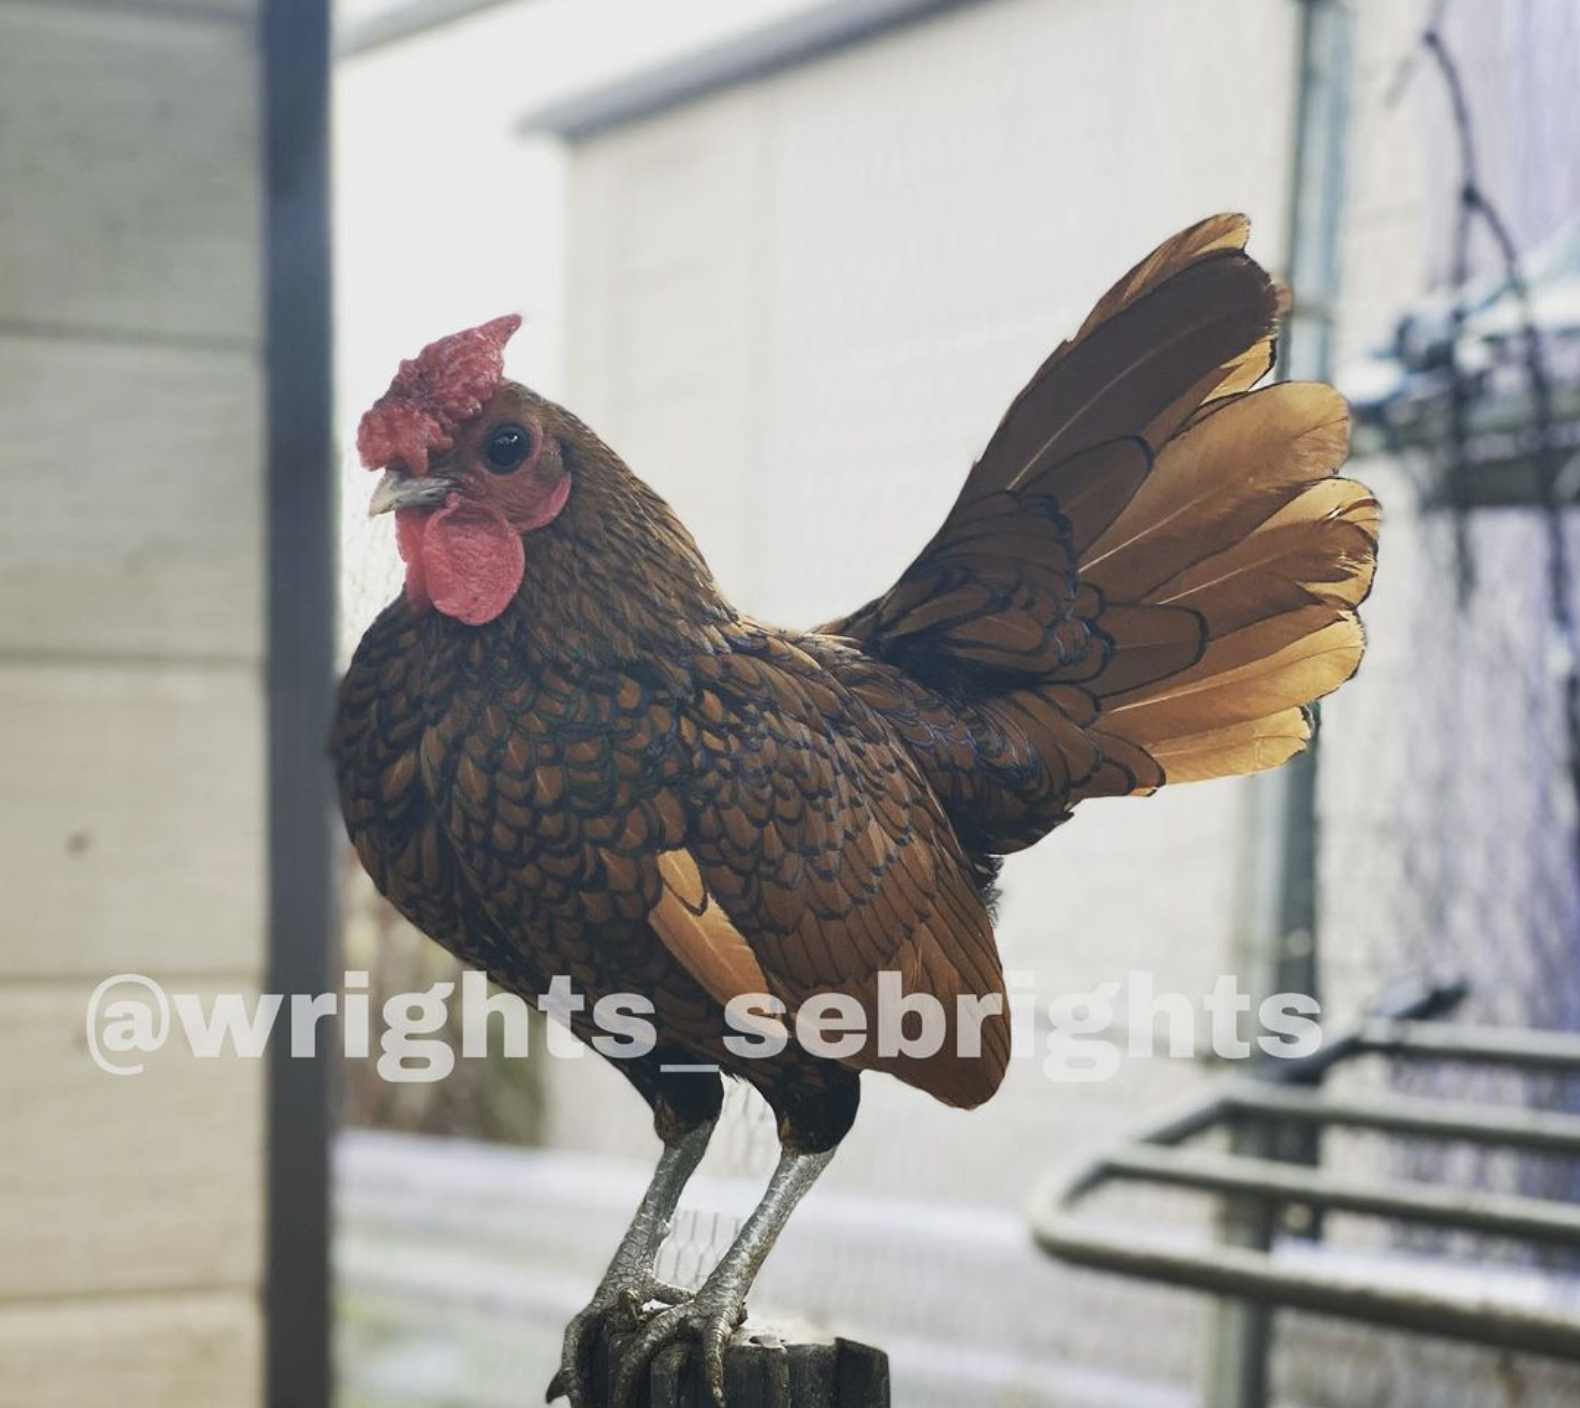 Sebright Bantams: Tiny Jewels in the Poultry World